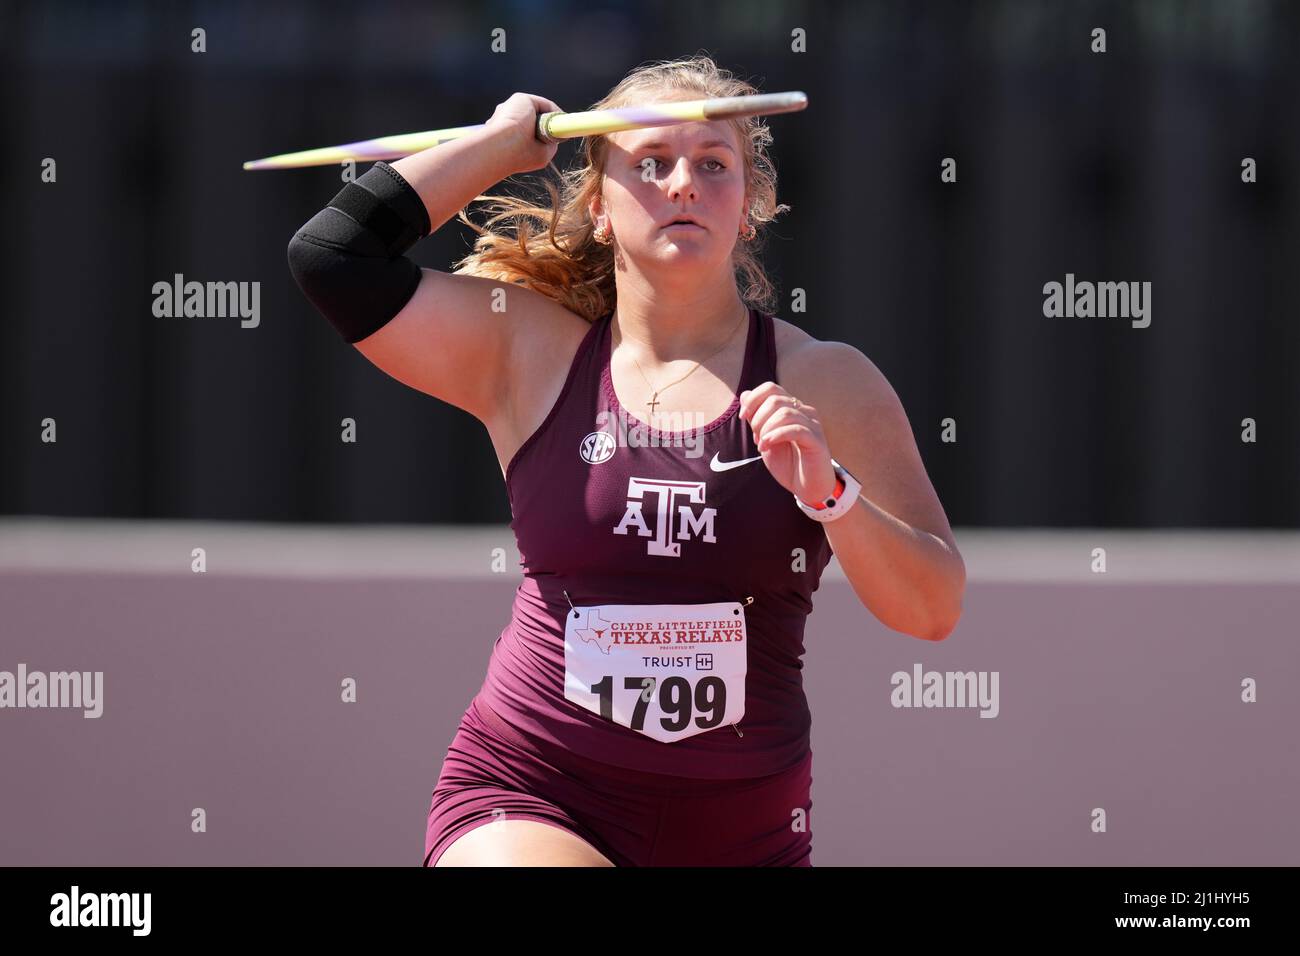 Katelyn Fairchild of Texas A&M places sixth in the women's javelin at 168-11 (51.48m) during the 94th Clyde Littlefield Texas Relays, Friday, Mar 25, Stock Photo